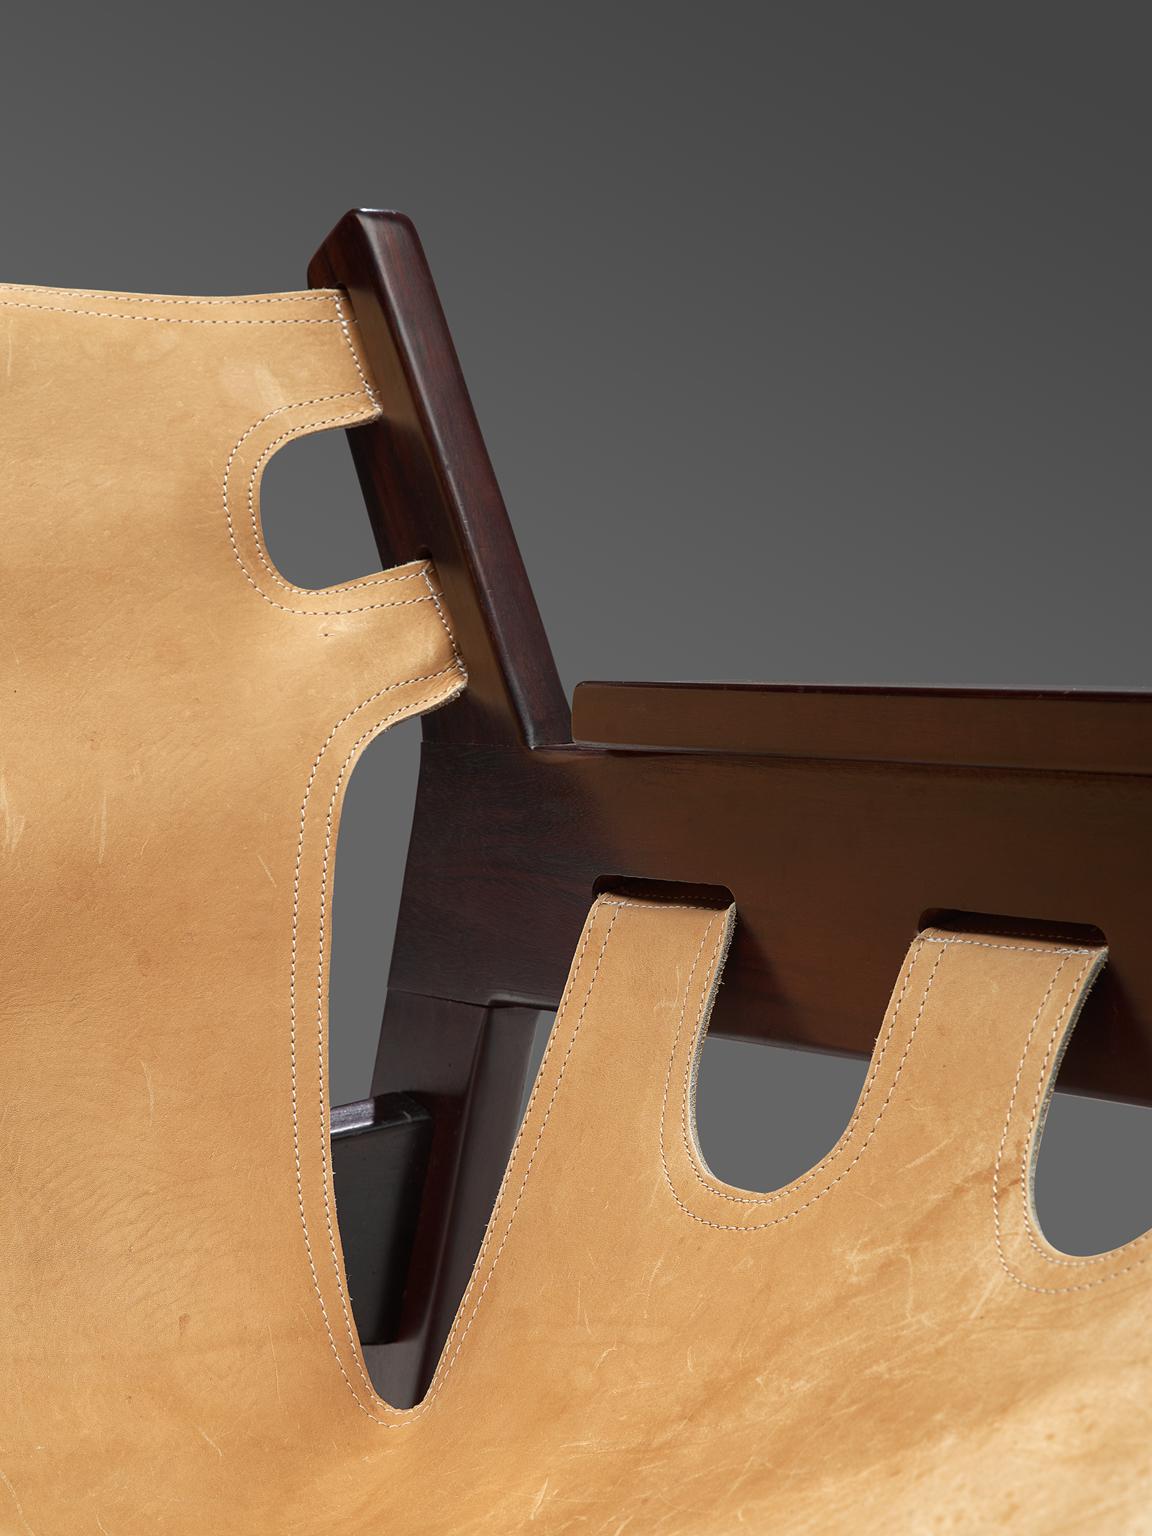 Sergio Rodrigues 'Kilin' Rosewood Armchair with Beige Leather 1